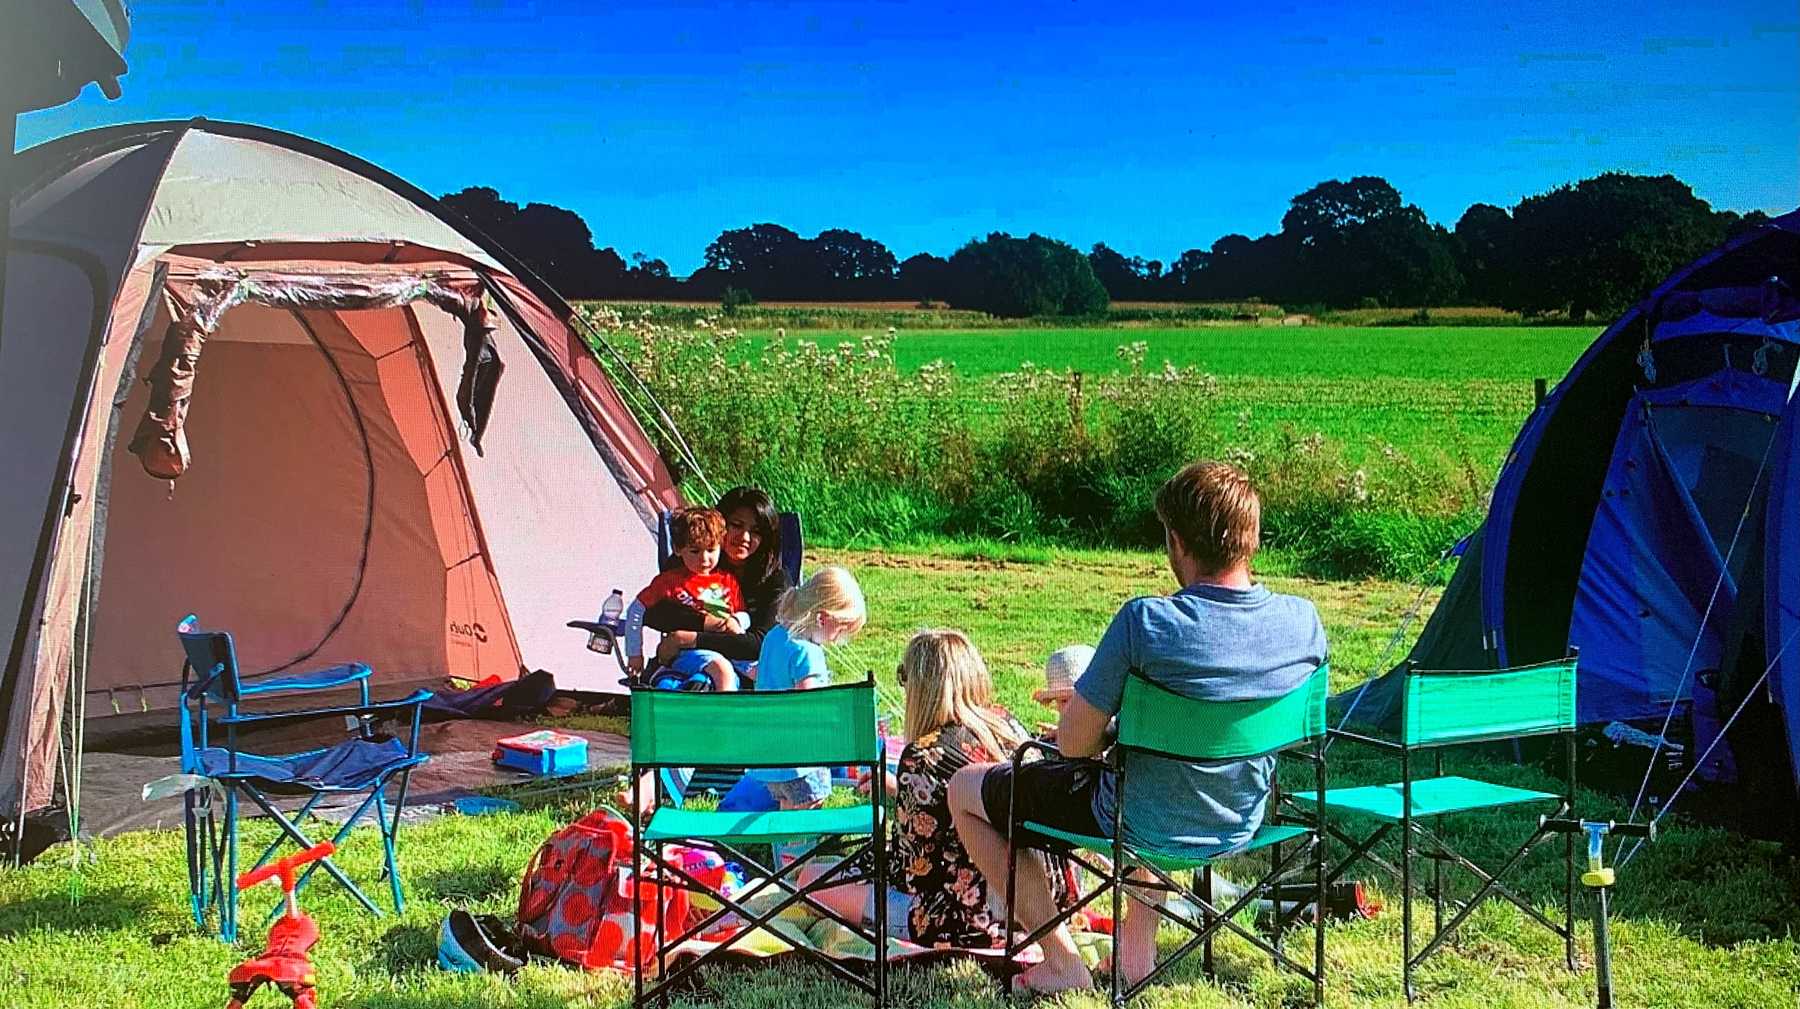 The Walled Garden Campsite Moreton Updated 2021 Prices Pitchup